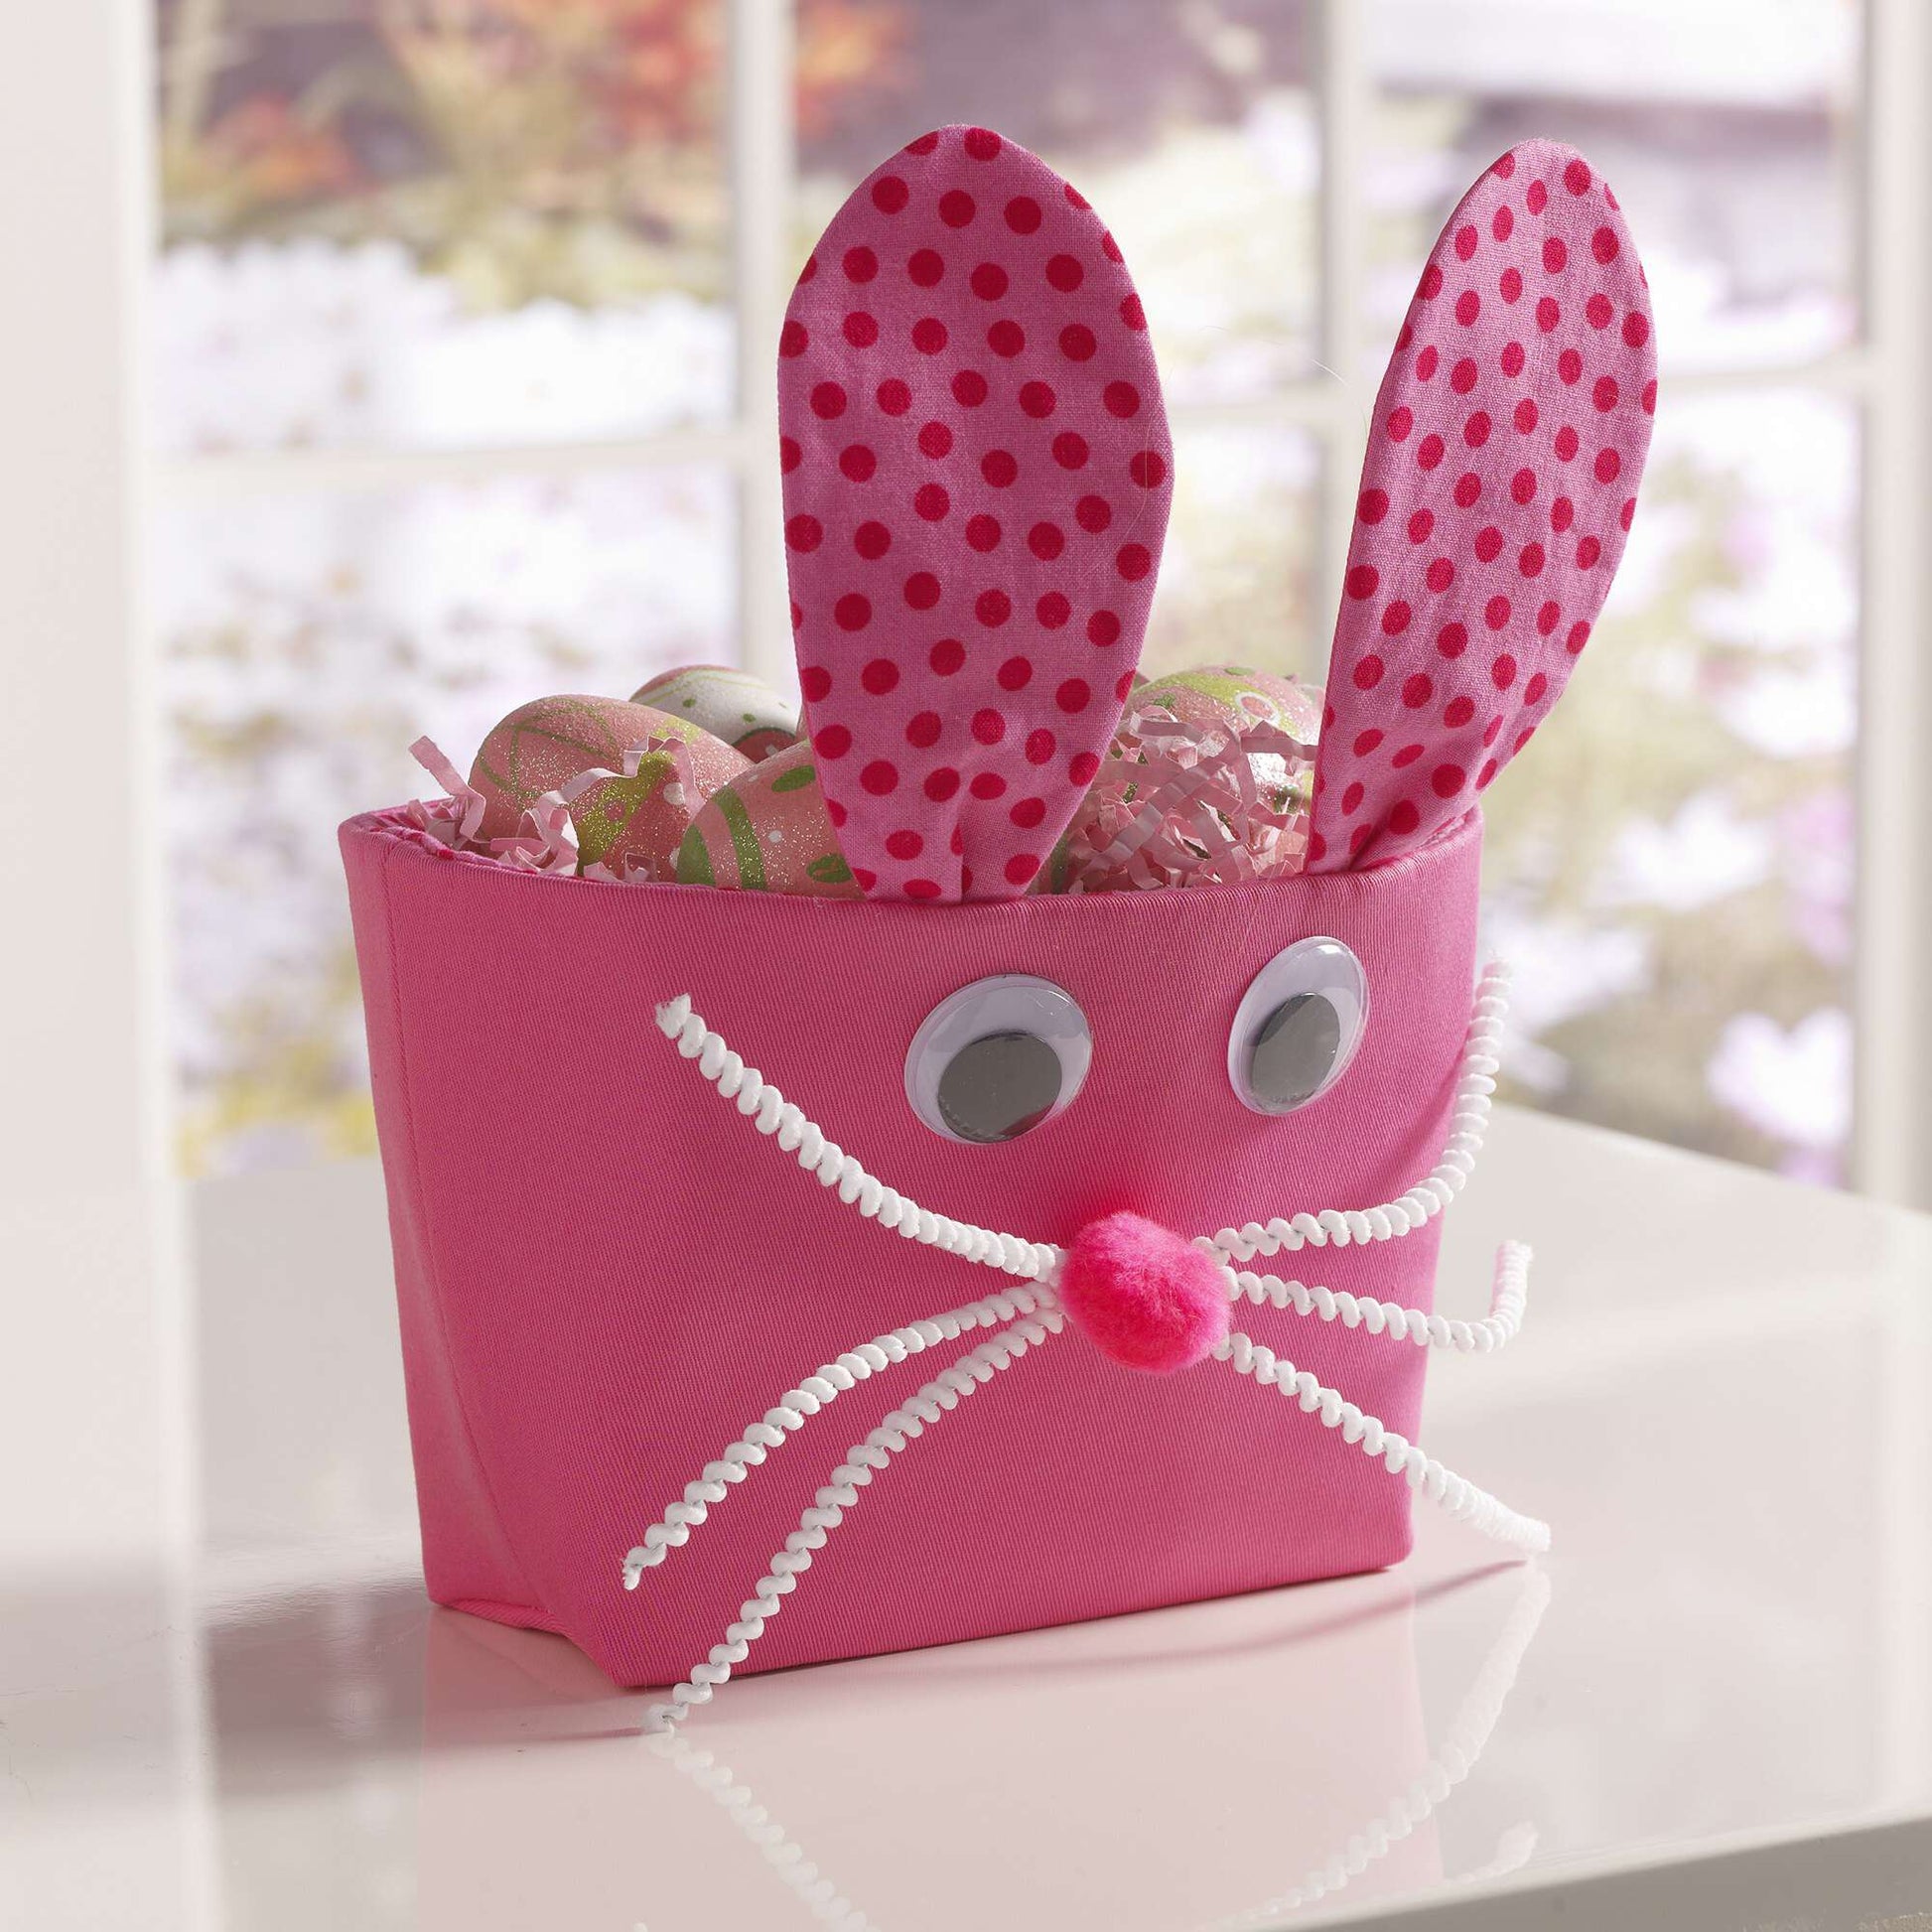 Free Coats & Clark Sewing Easter Bunny Basket Pattern